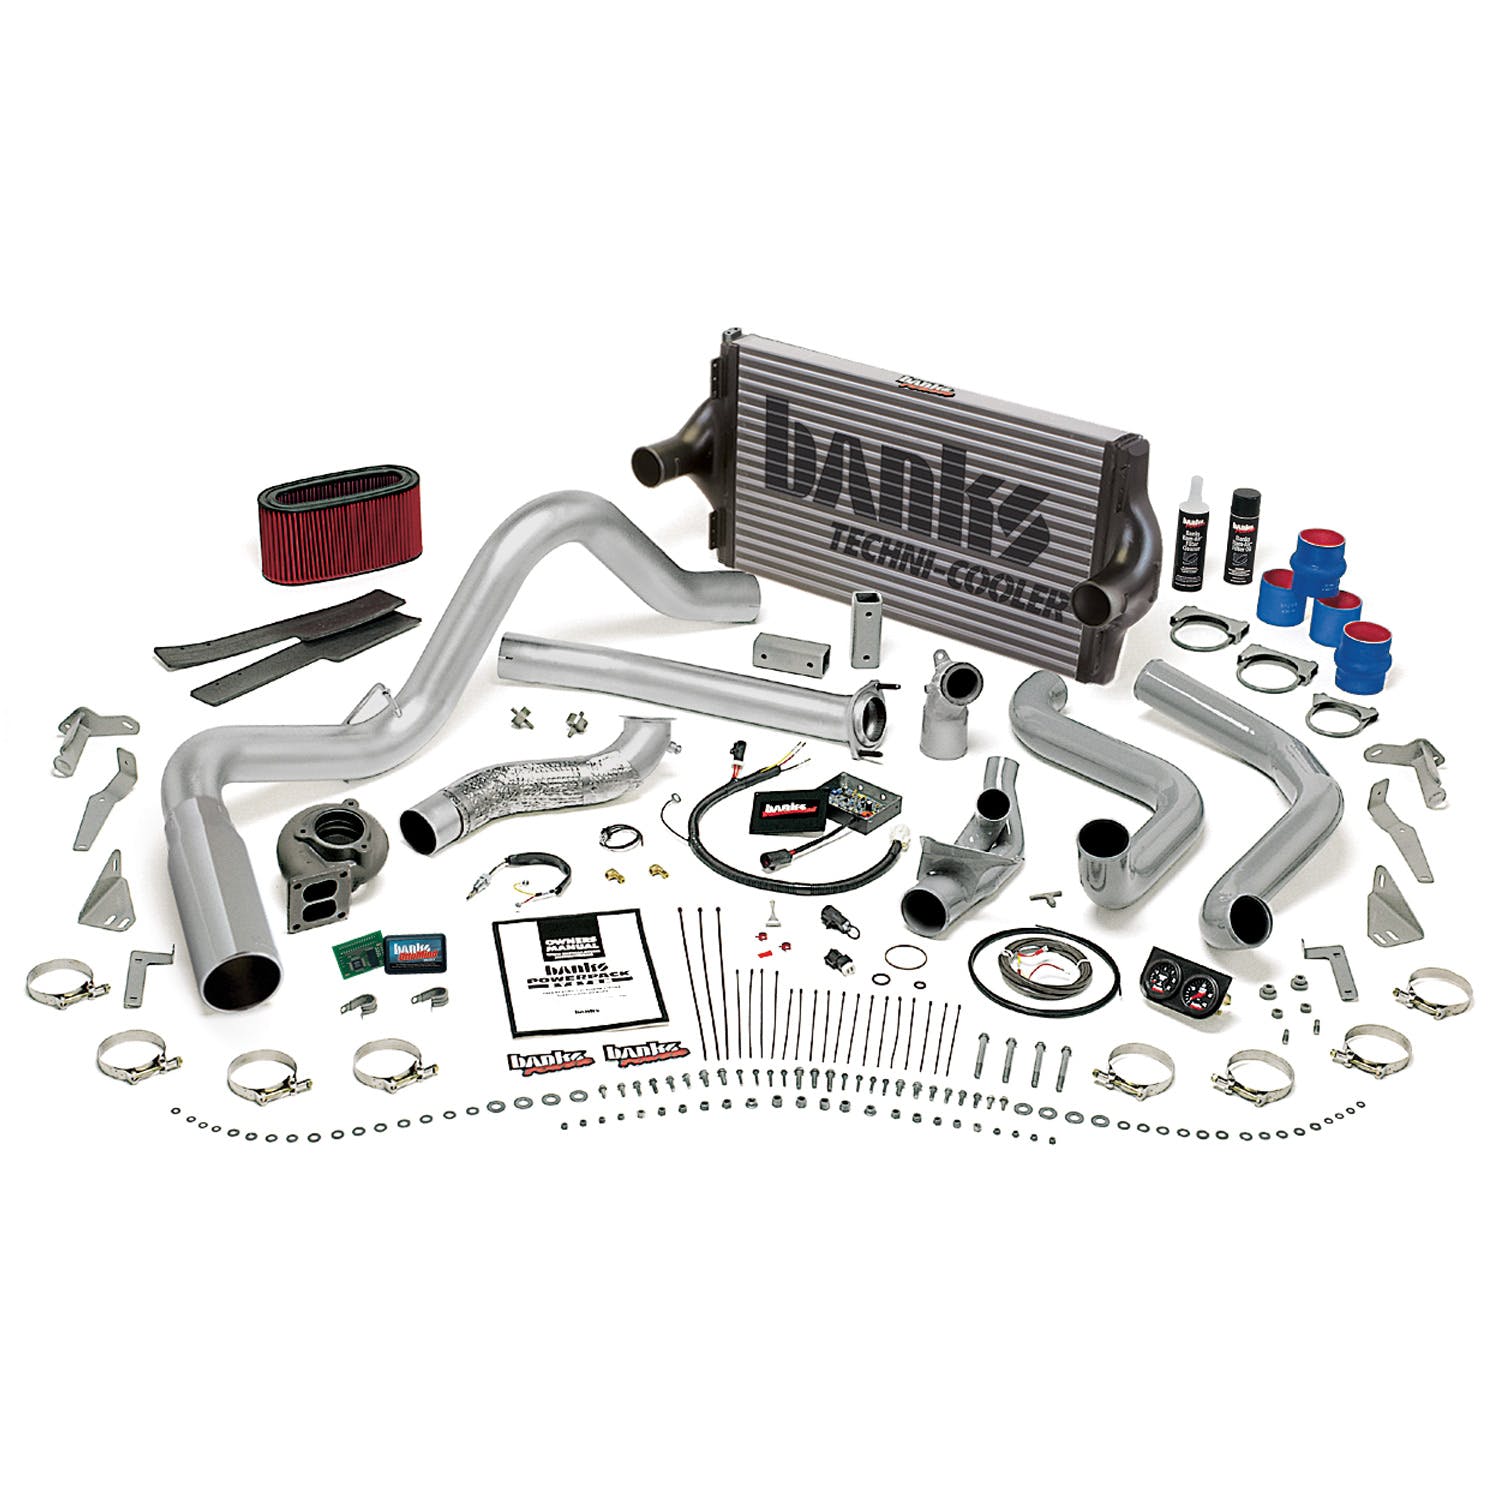 Banks Power 48561 Powerpack System-1995 1/2-97 Ford 7.3L; Auto